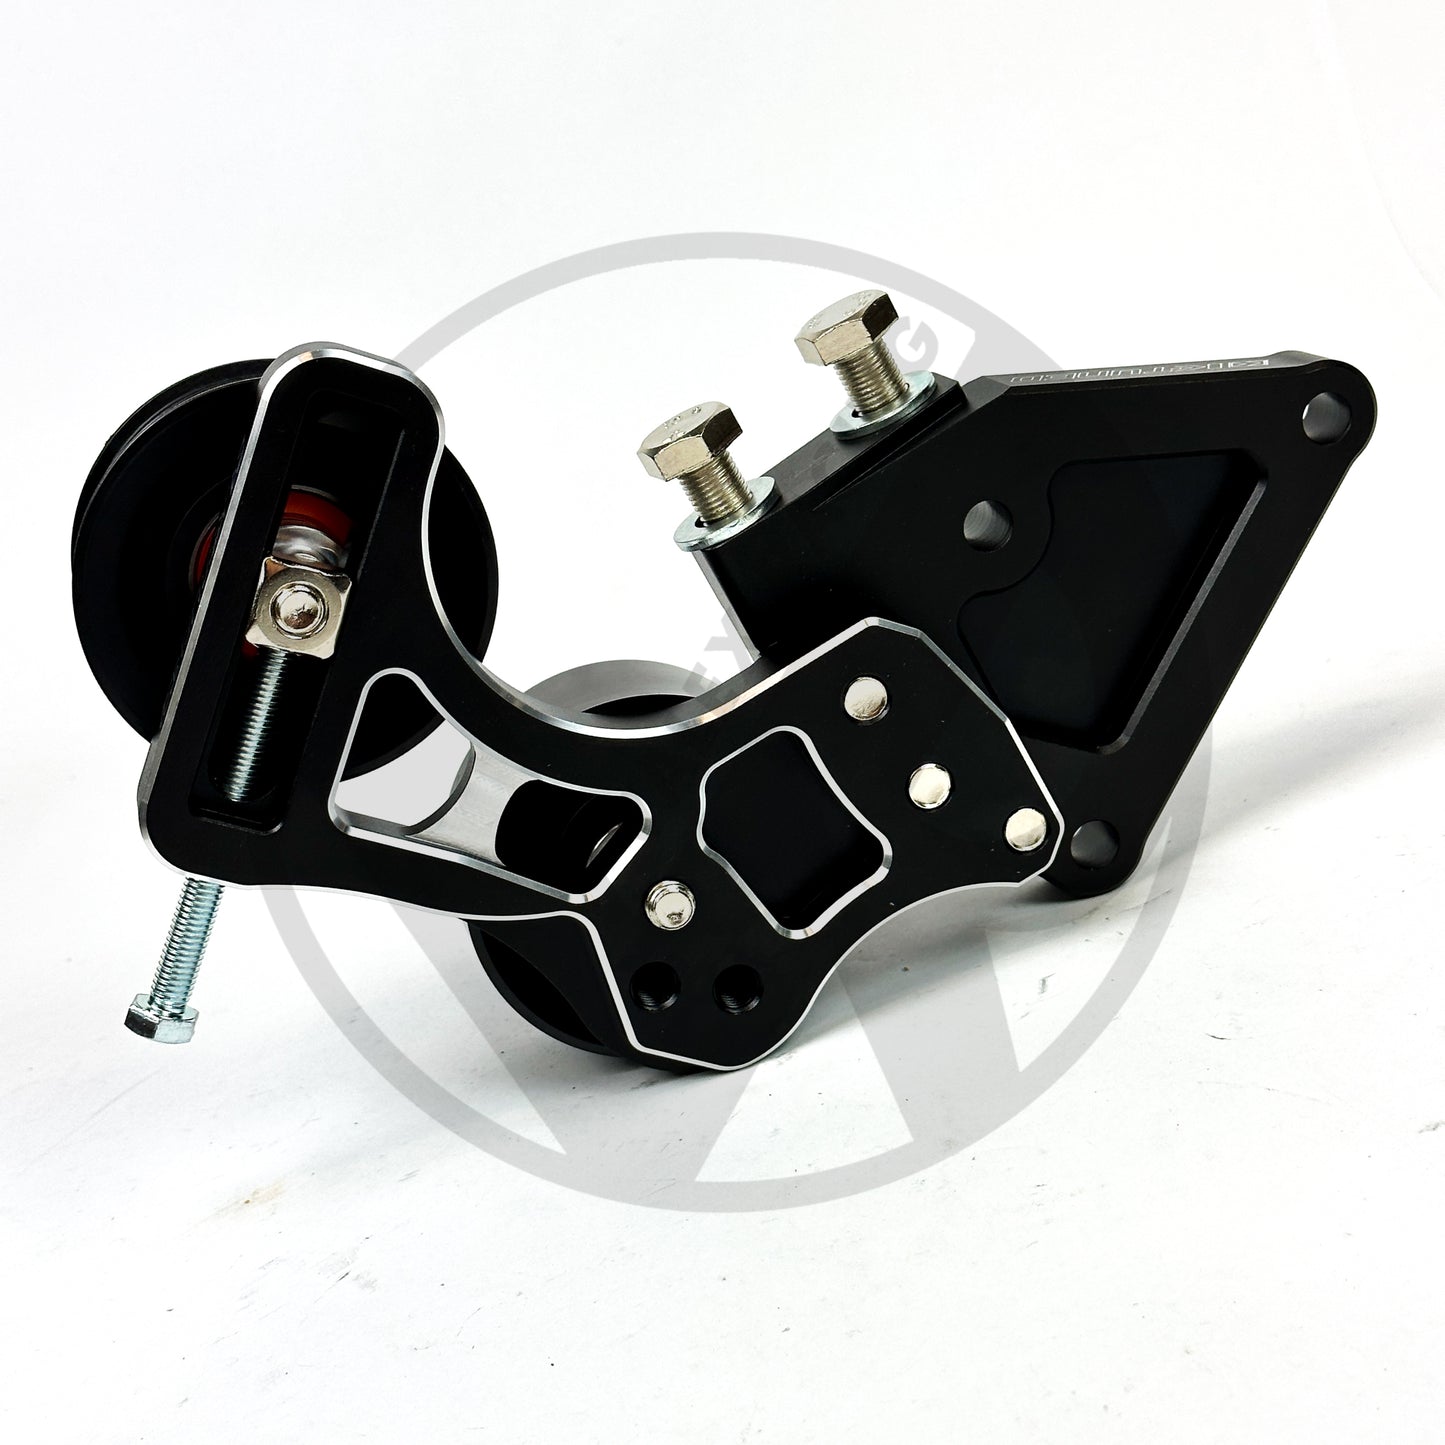 K-tuned Side Mount Pullet Kit For Honda Acura K20 and K24 Engines